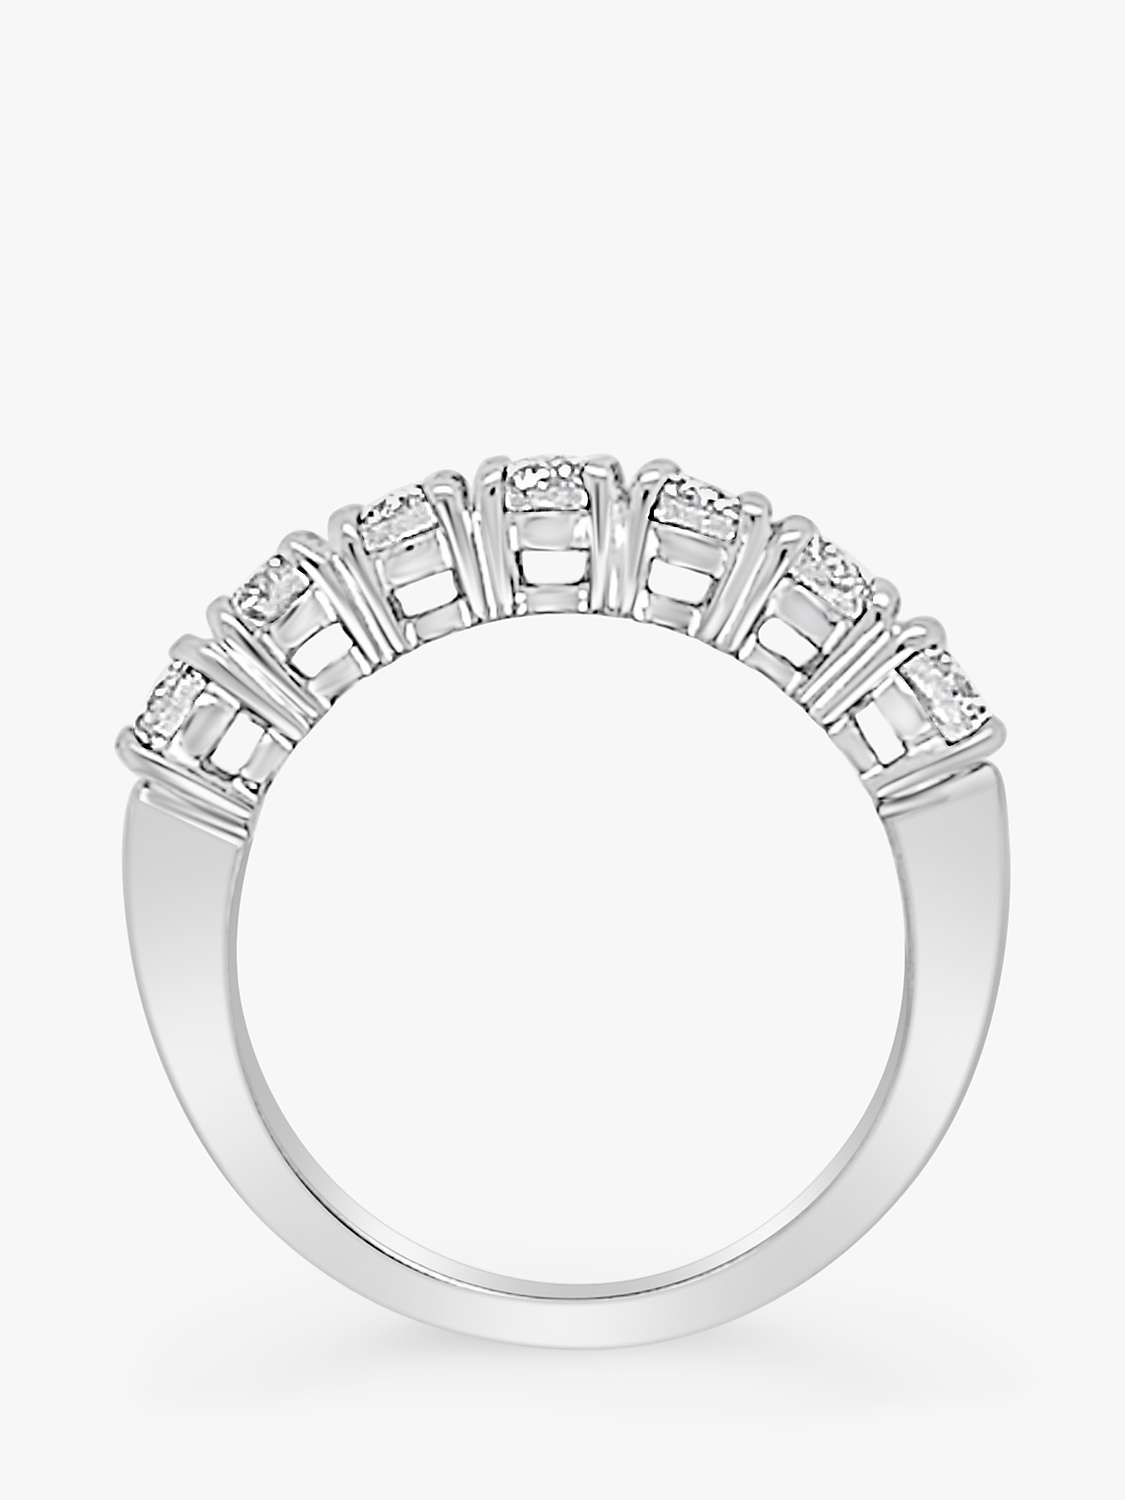 Buy Milton & Humble Jewellery 18ct White Gold Second Hand Diamond Ring Online at johnlewis.com